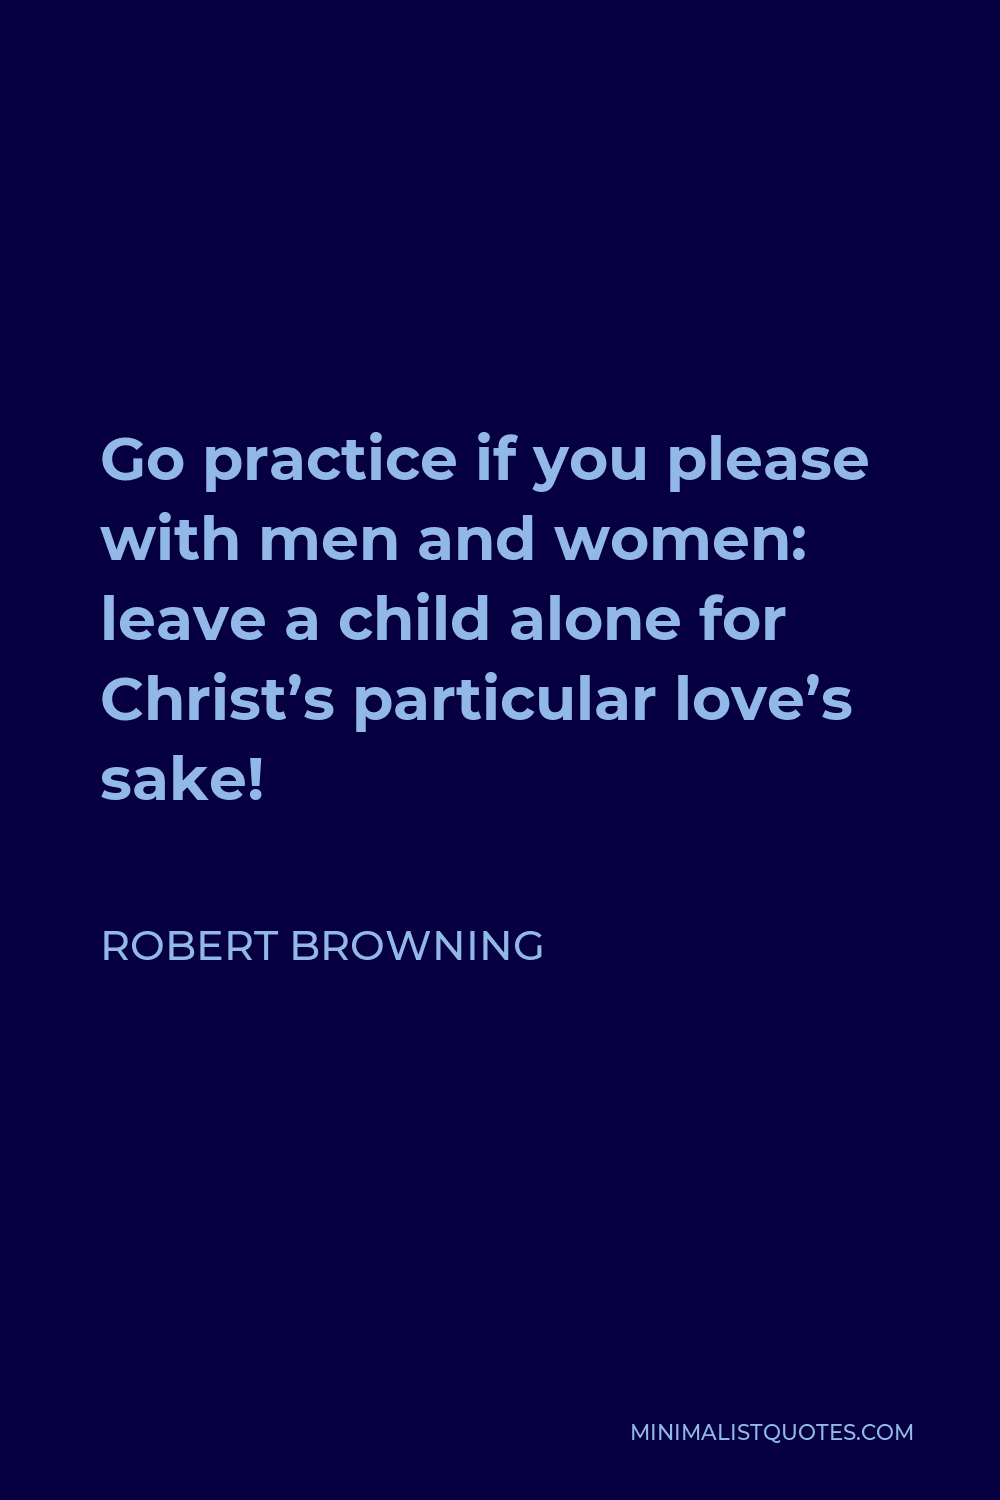 Robert Browning Quote - Go practice if you please with men and women: leave a child alone for Christ’s particular love’s sake!